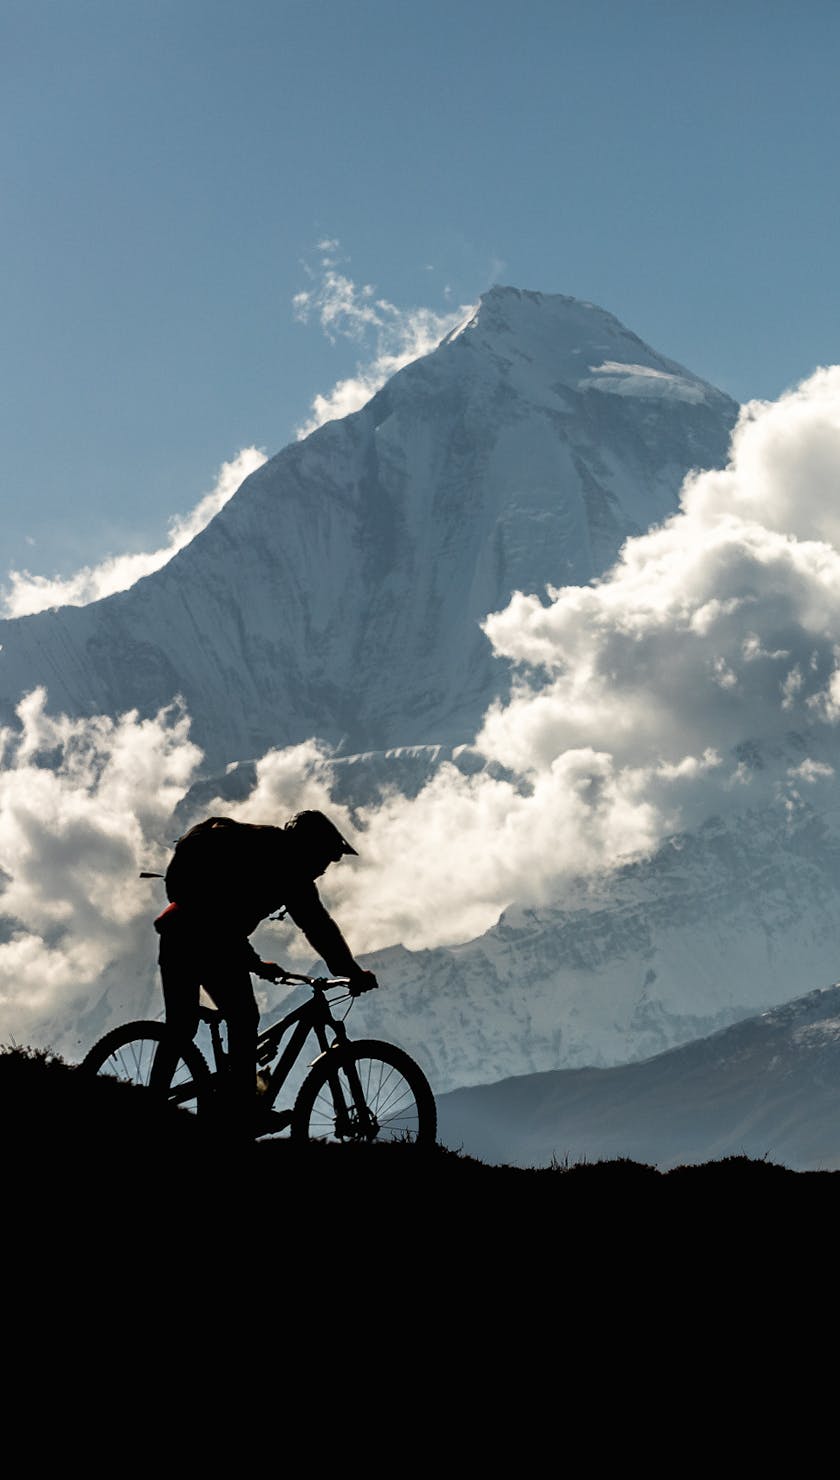 International Gathering Nepal - Riders, mountains and clouds.